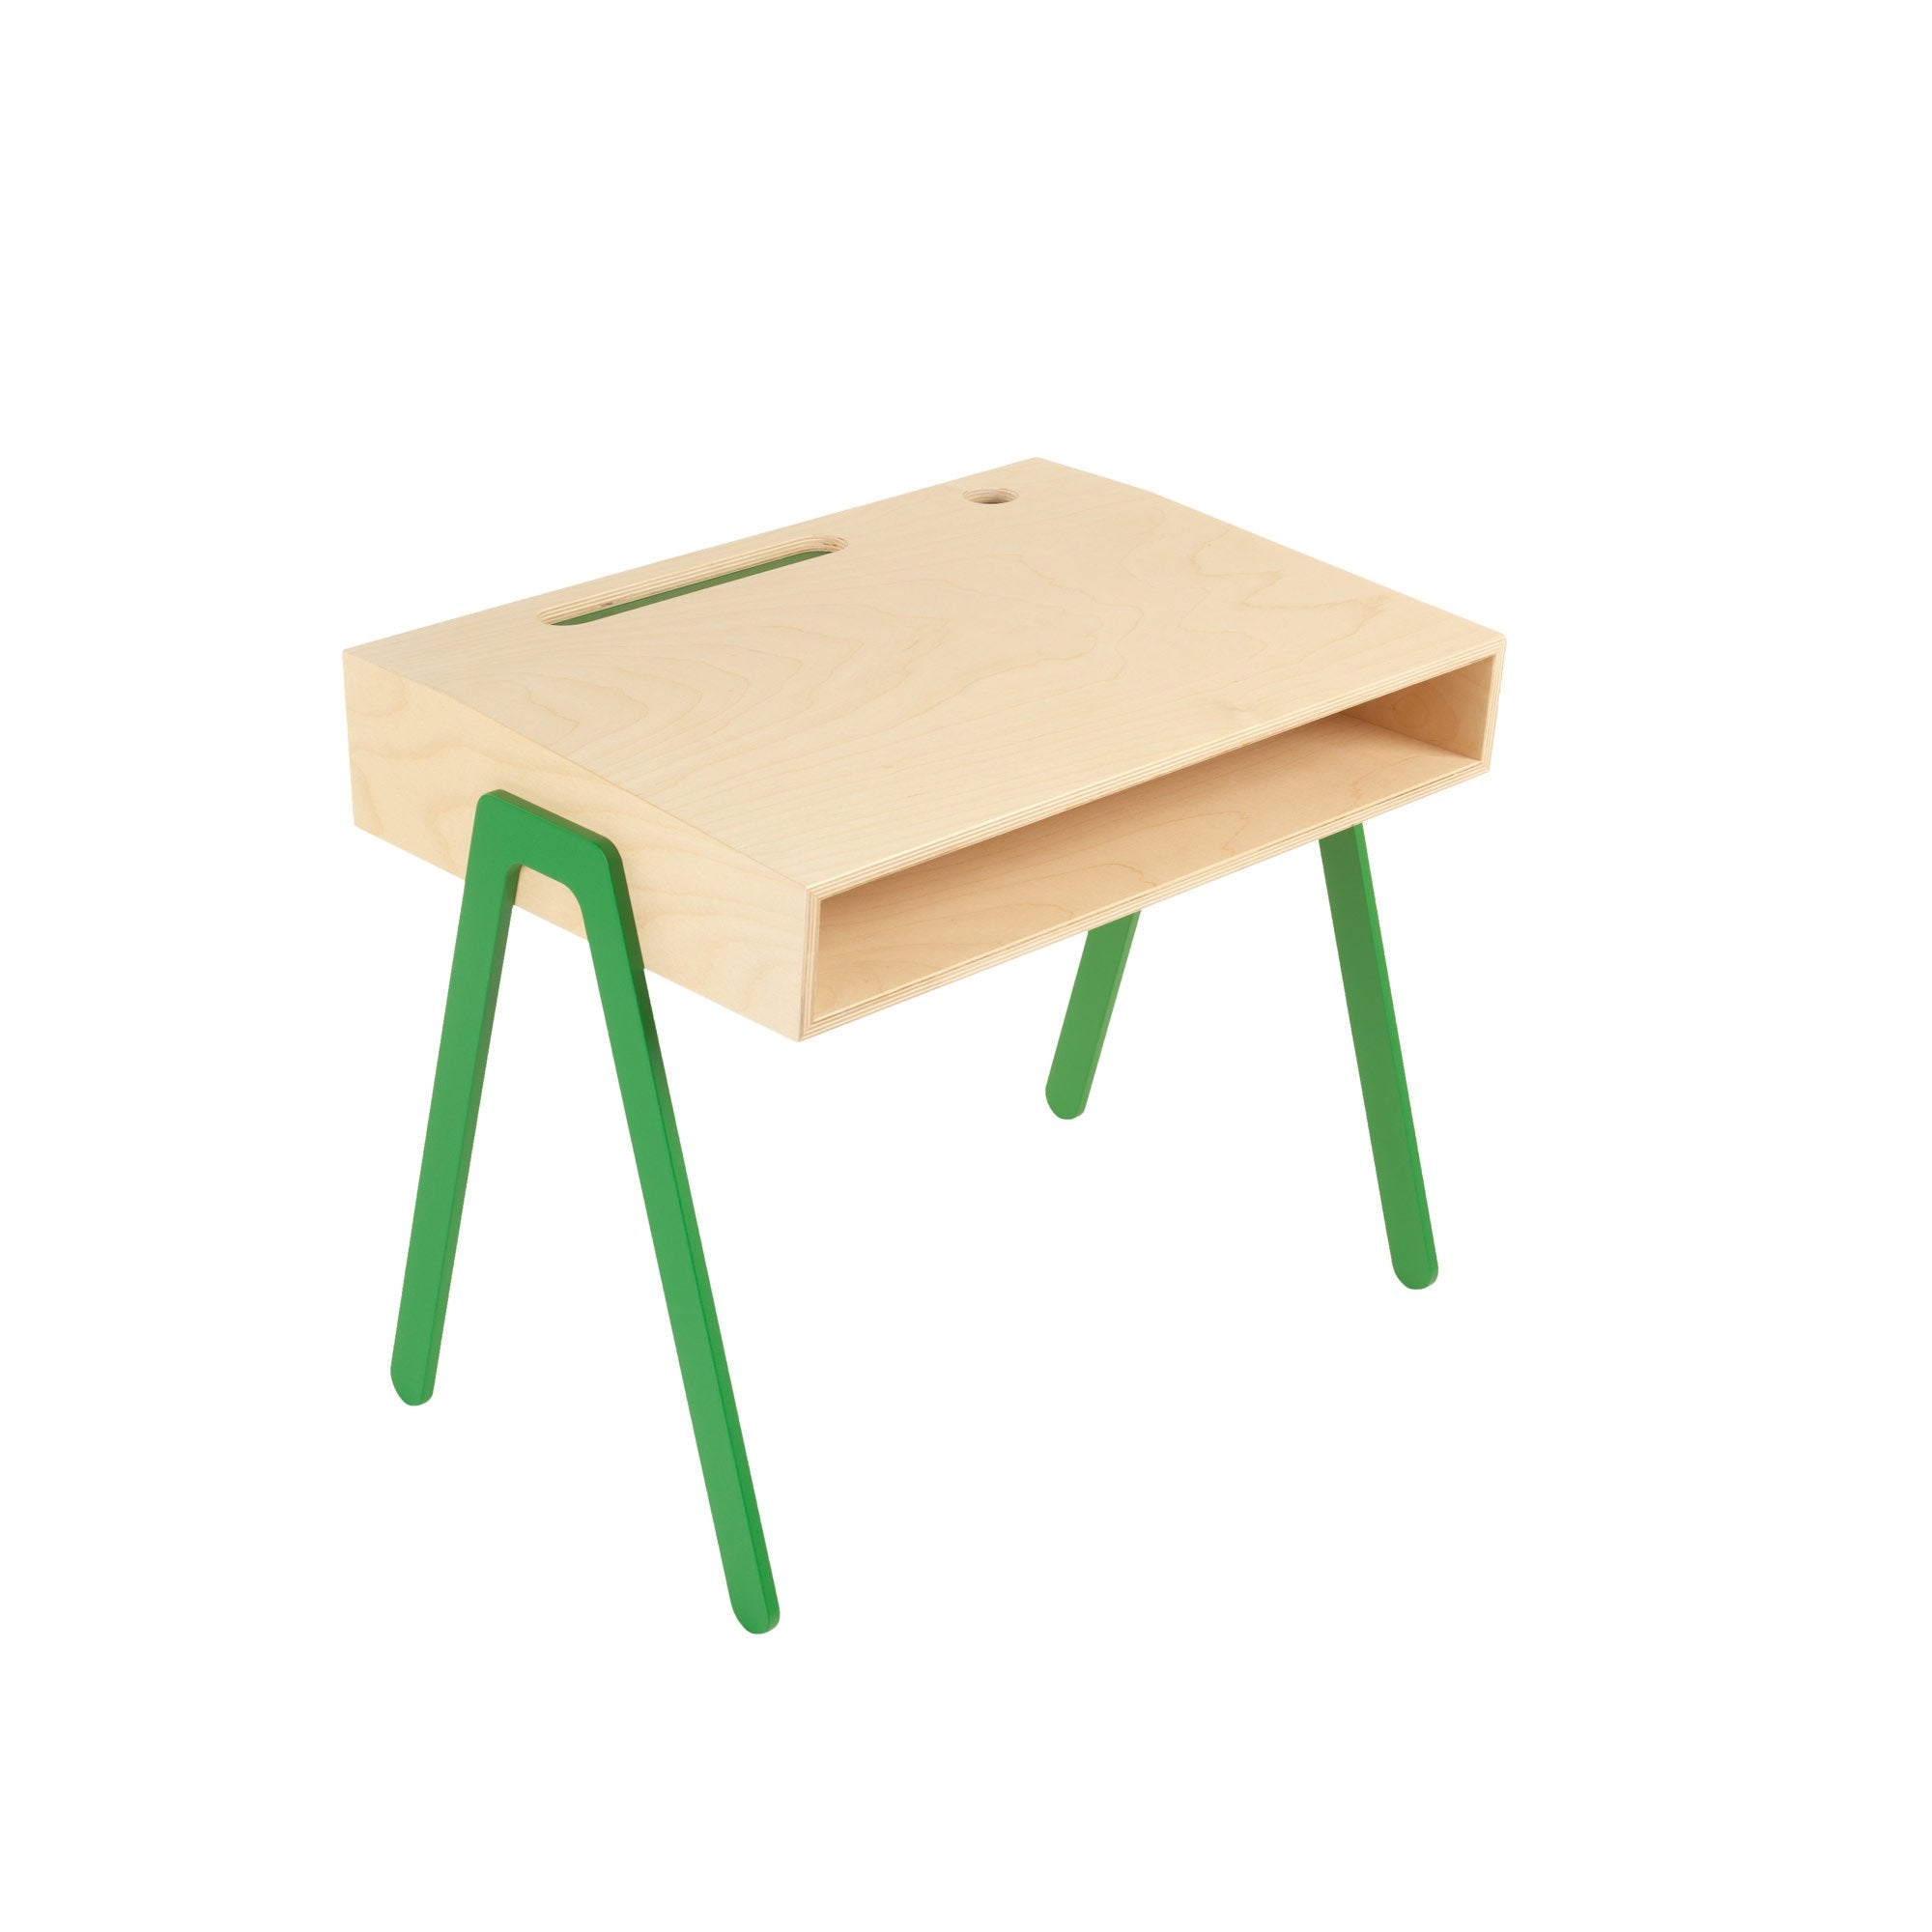 A Desk For Kids Cheaper Than Retail Price Buy Clothing Accessories And Lifestyle Products For Women Men